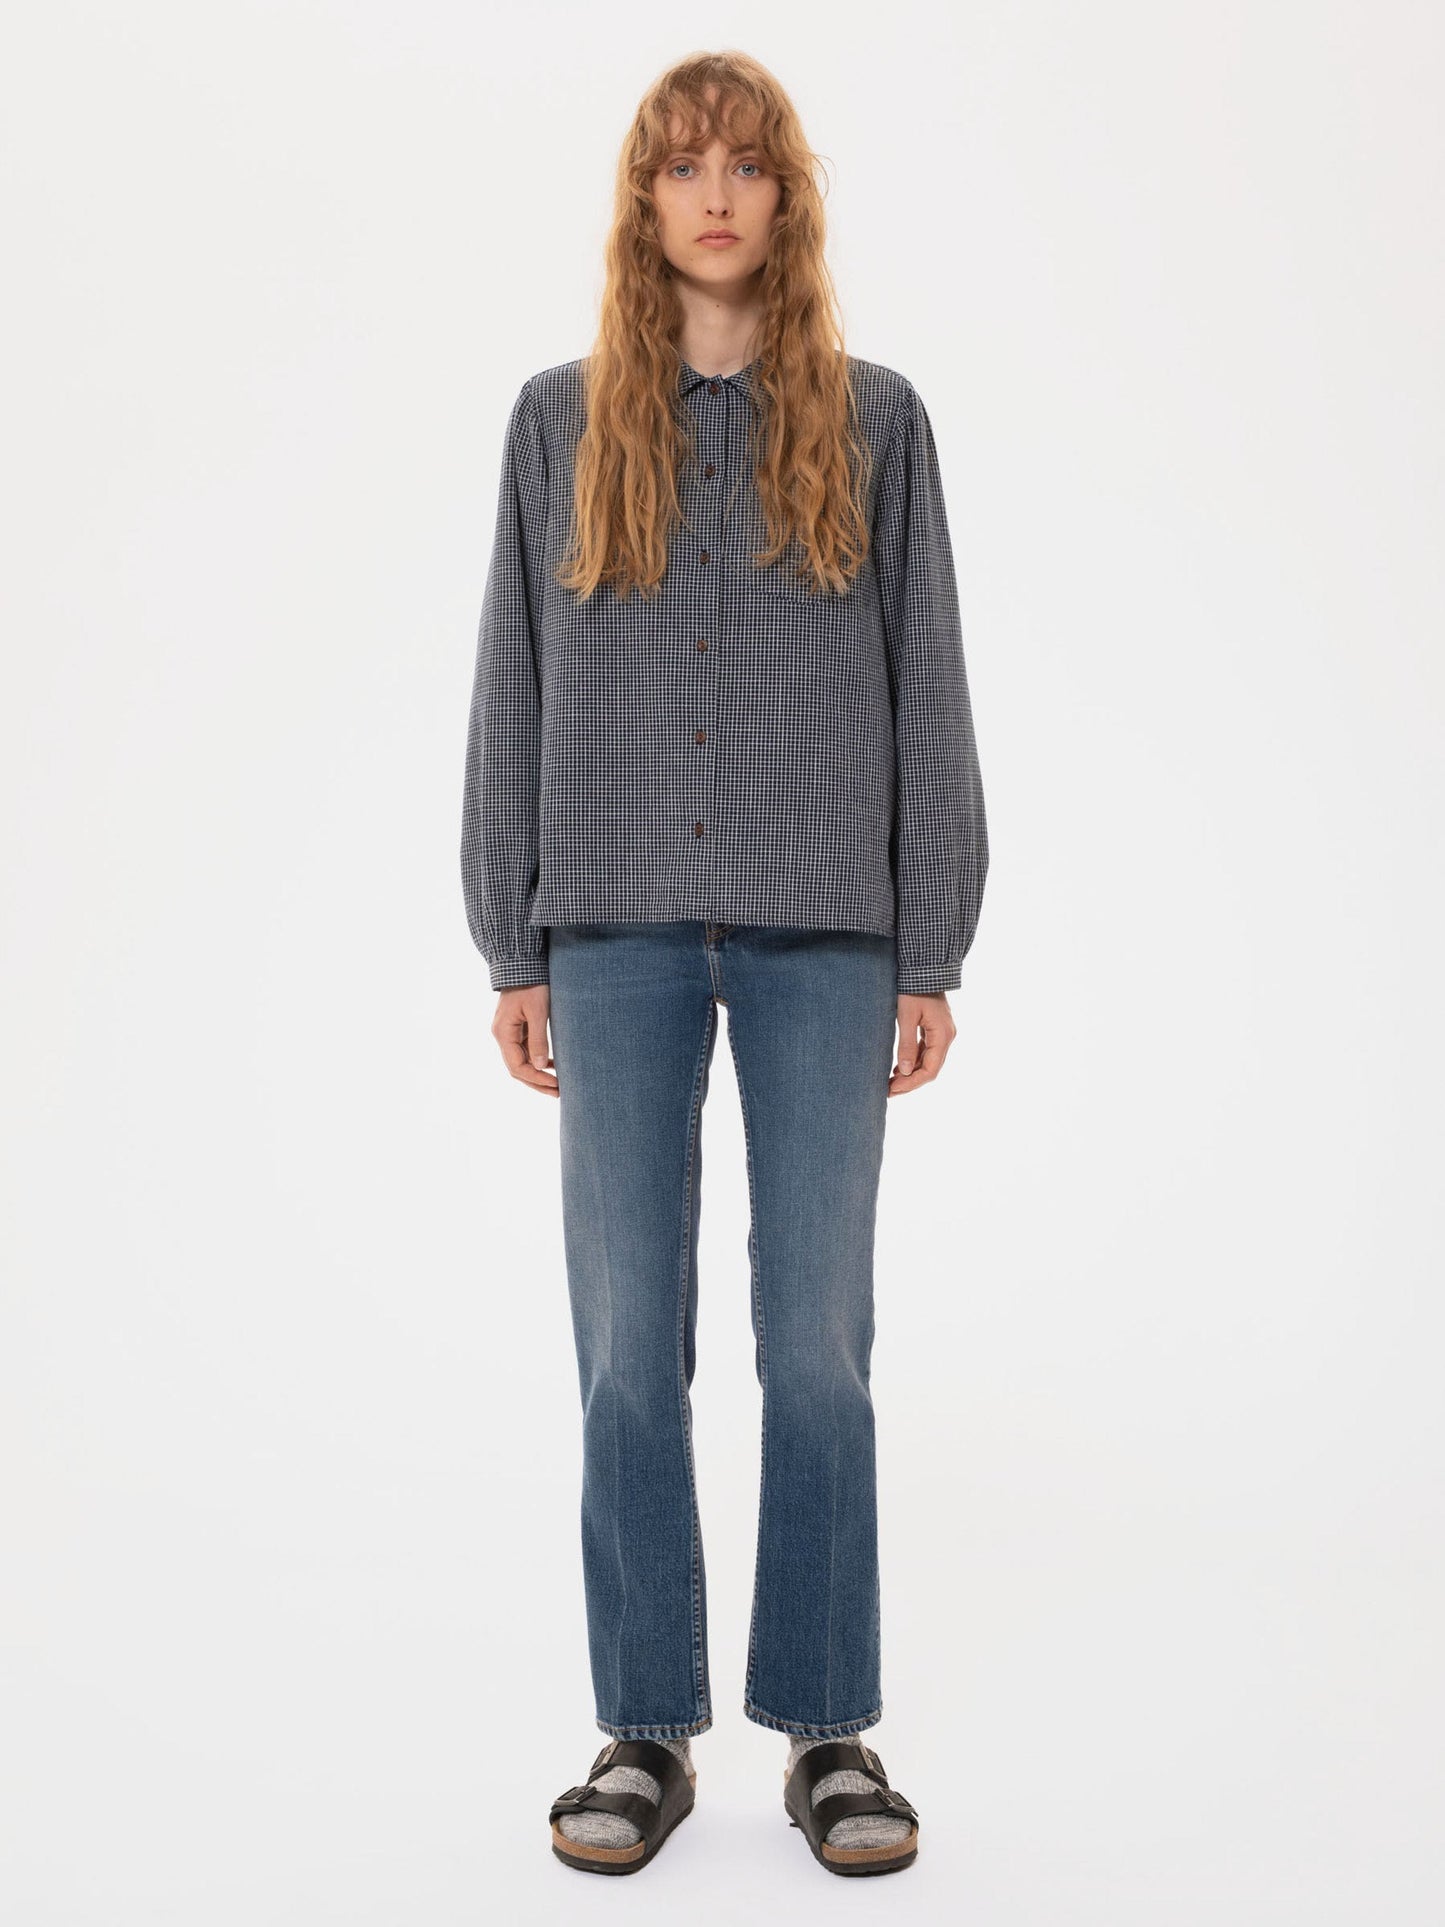 Nudie Jeans Co Edith Check Blouse, Indigo